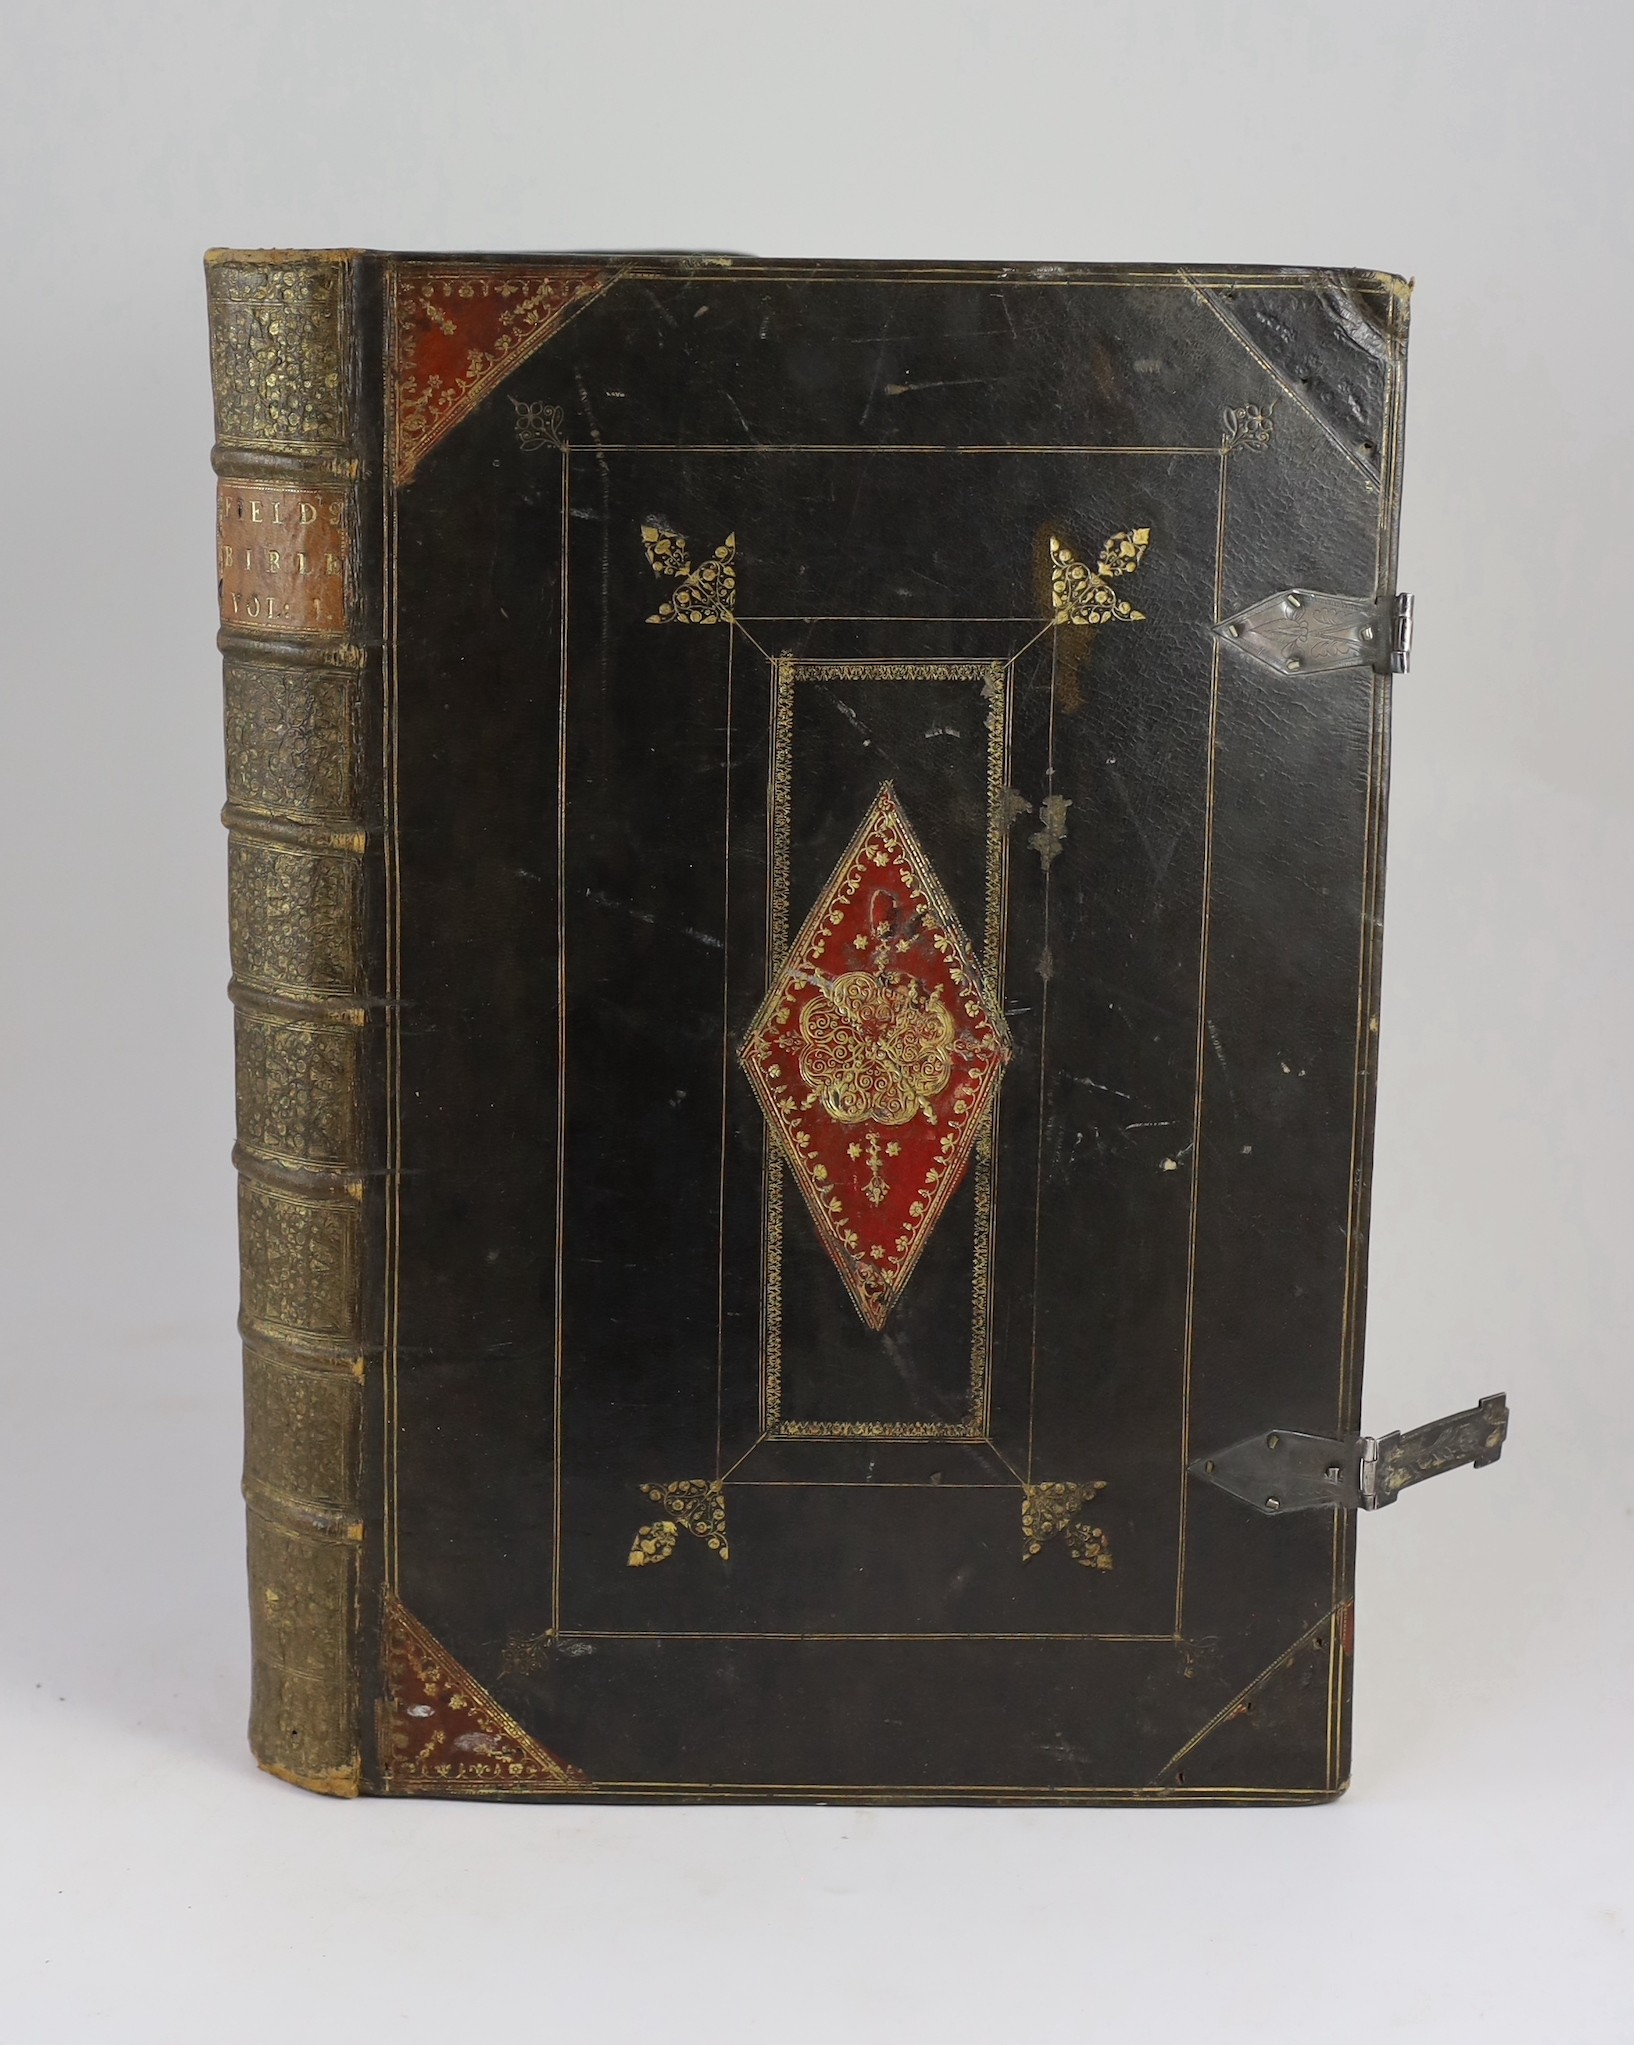 [John Field's 1660 Restoration Prayer Book] The Book of Common Prayer, and Administration of the Sacraments ... With the Psalter, or Psalmes of David. engraved frontis (royal arms, by Hollar), title (with engraved device